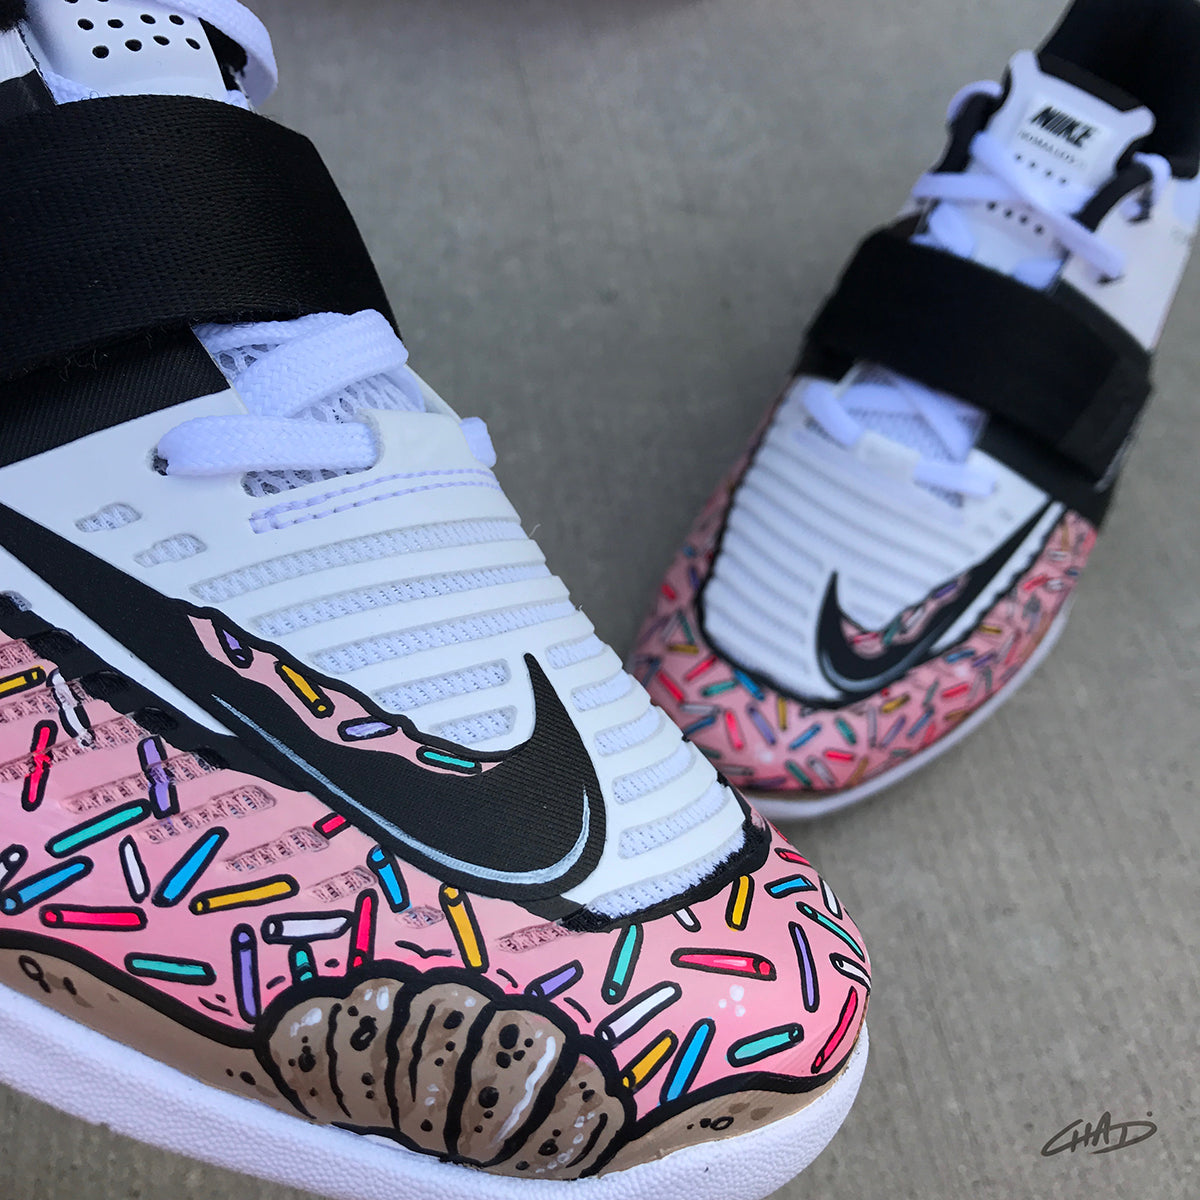 painted nikes